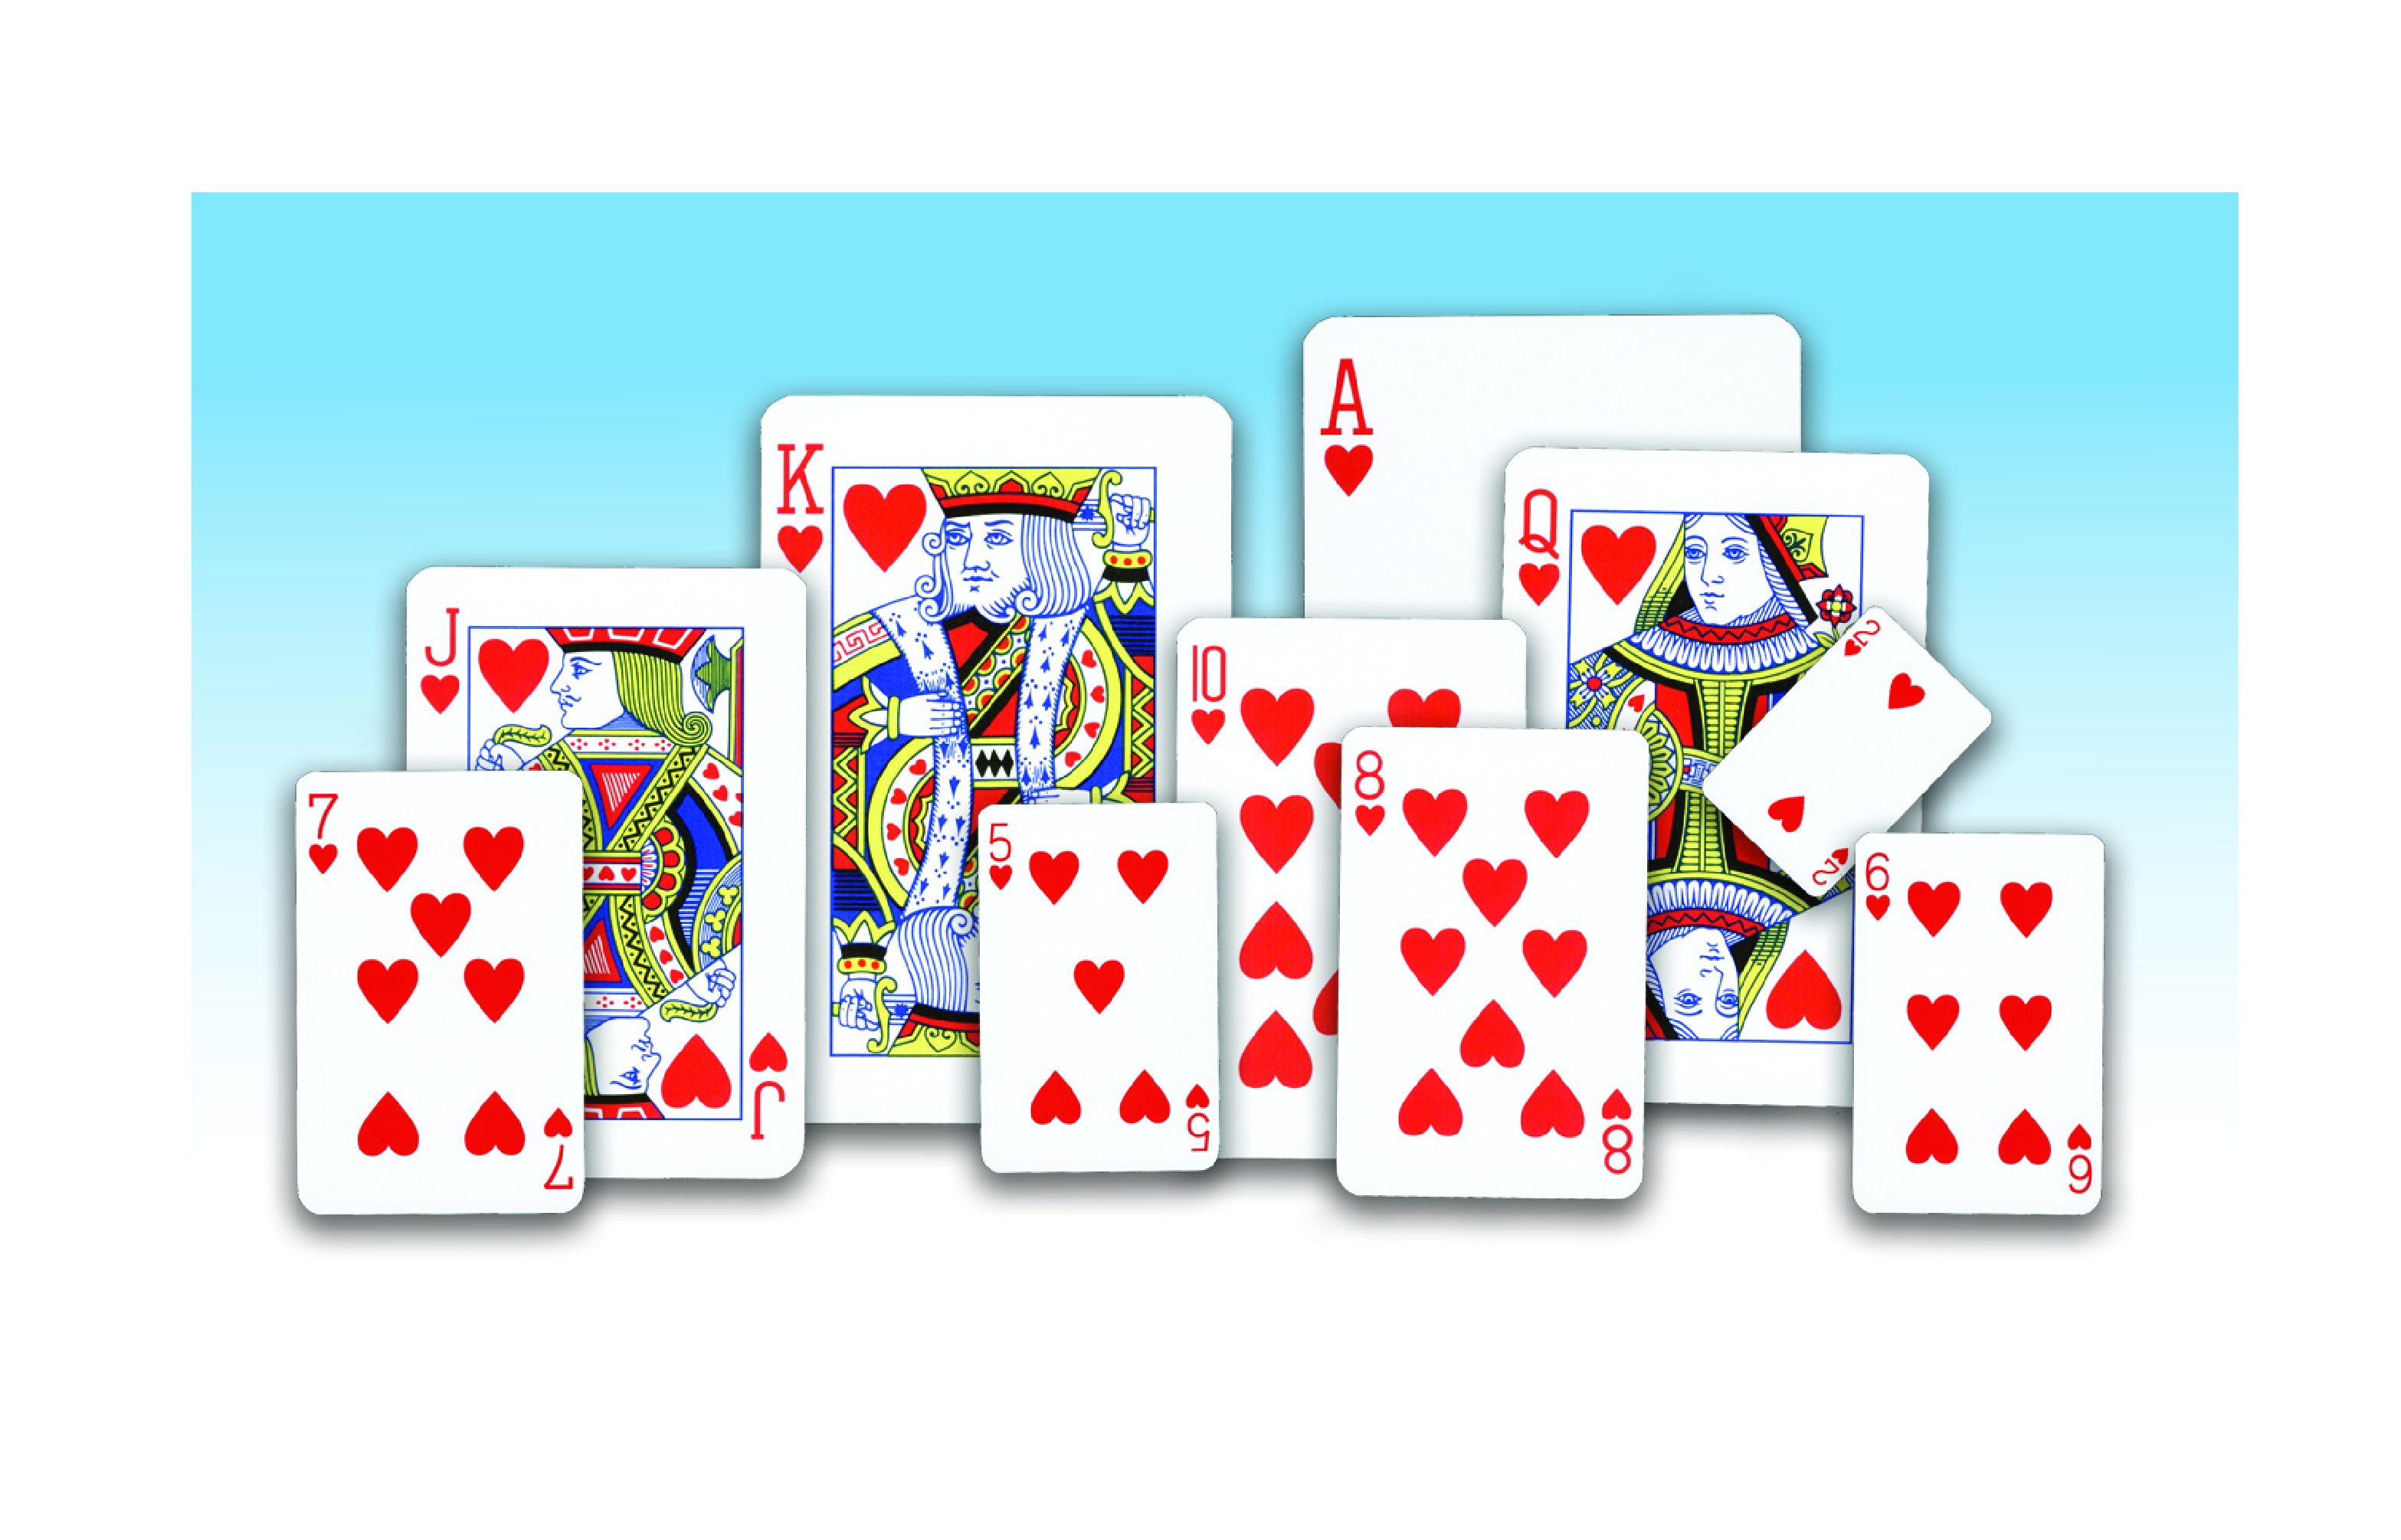 How difficult is it to teach Bridge to a novice card player?